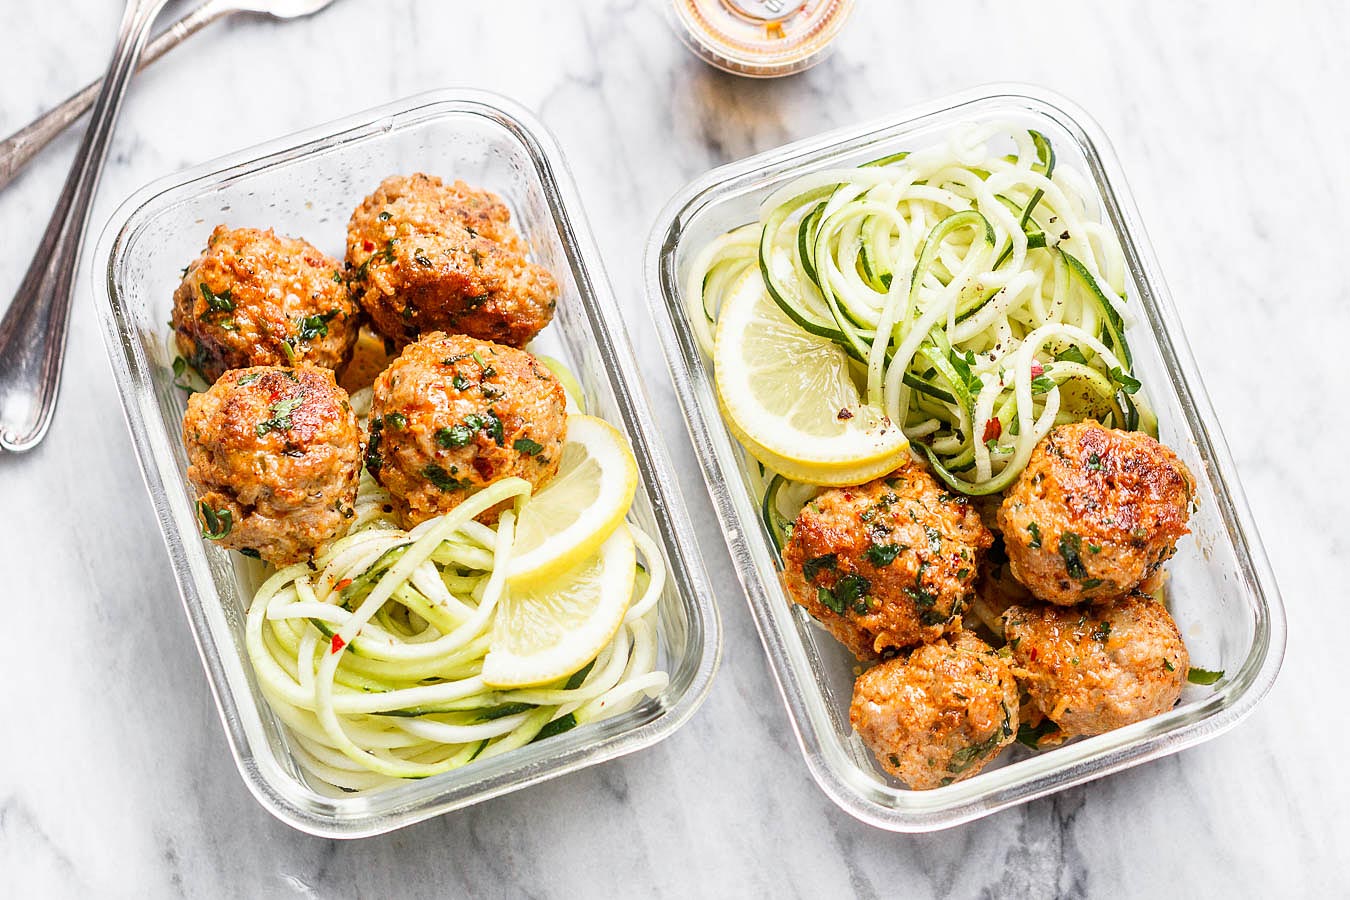 Meal Prep Garlic Butter Chicken Meatballs with Zucchini Noodles